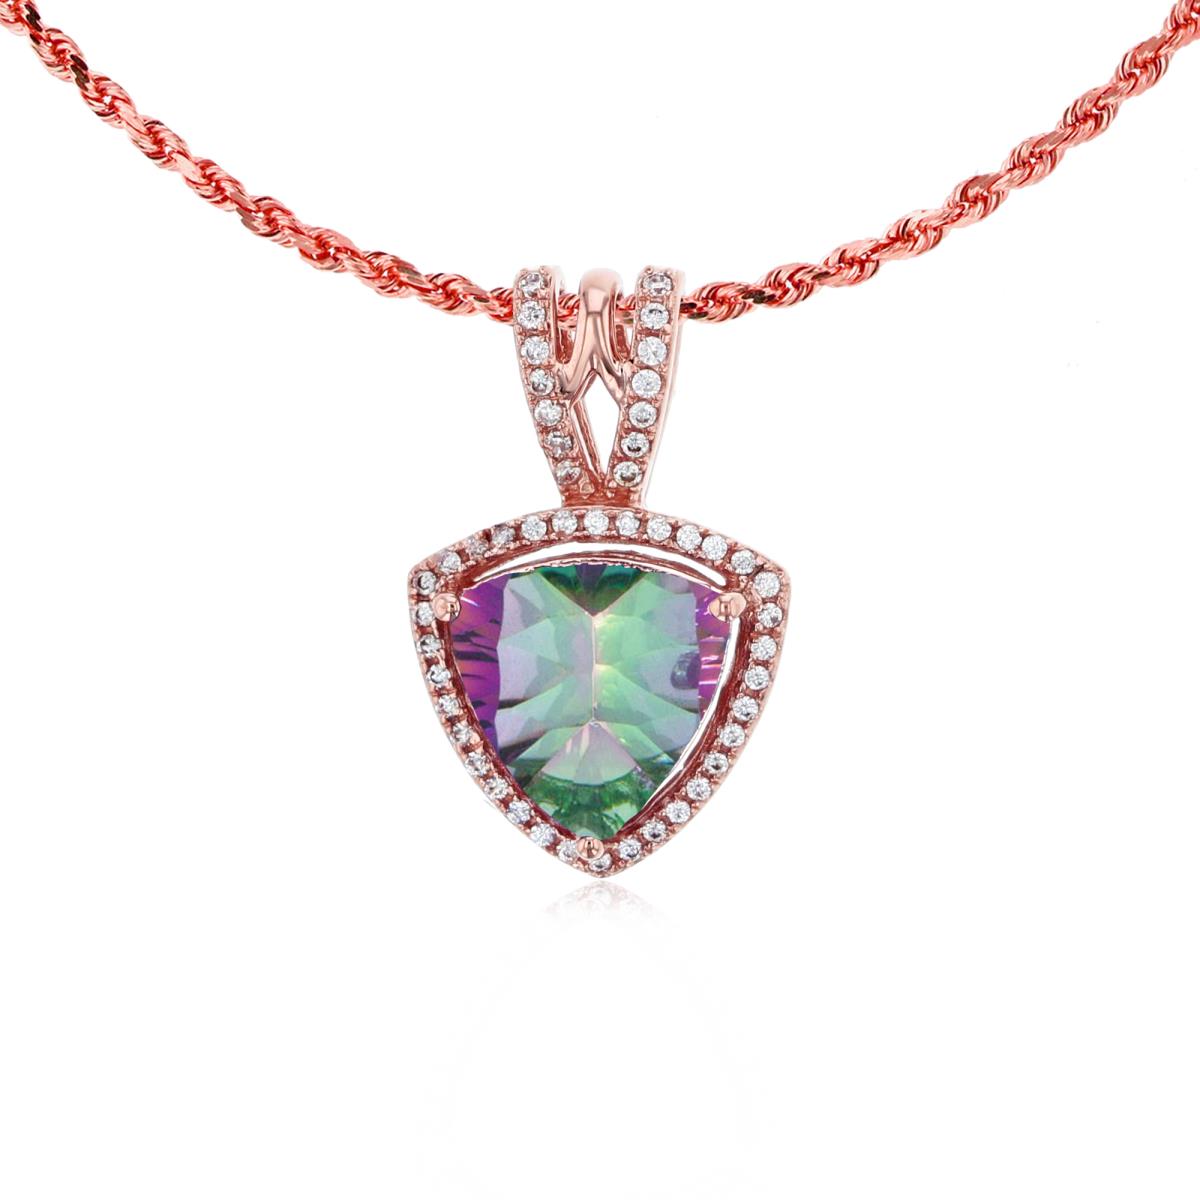 10K Rose Gold 8mm Trillion Mystic Green Topaz & 0.13 CTTW Diamonds Frame 18" Rope Chain Necklace